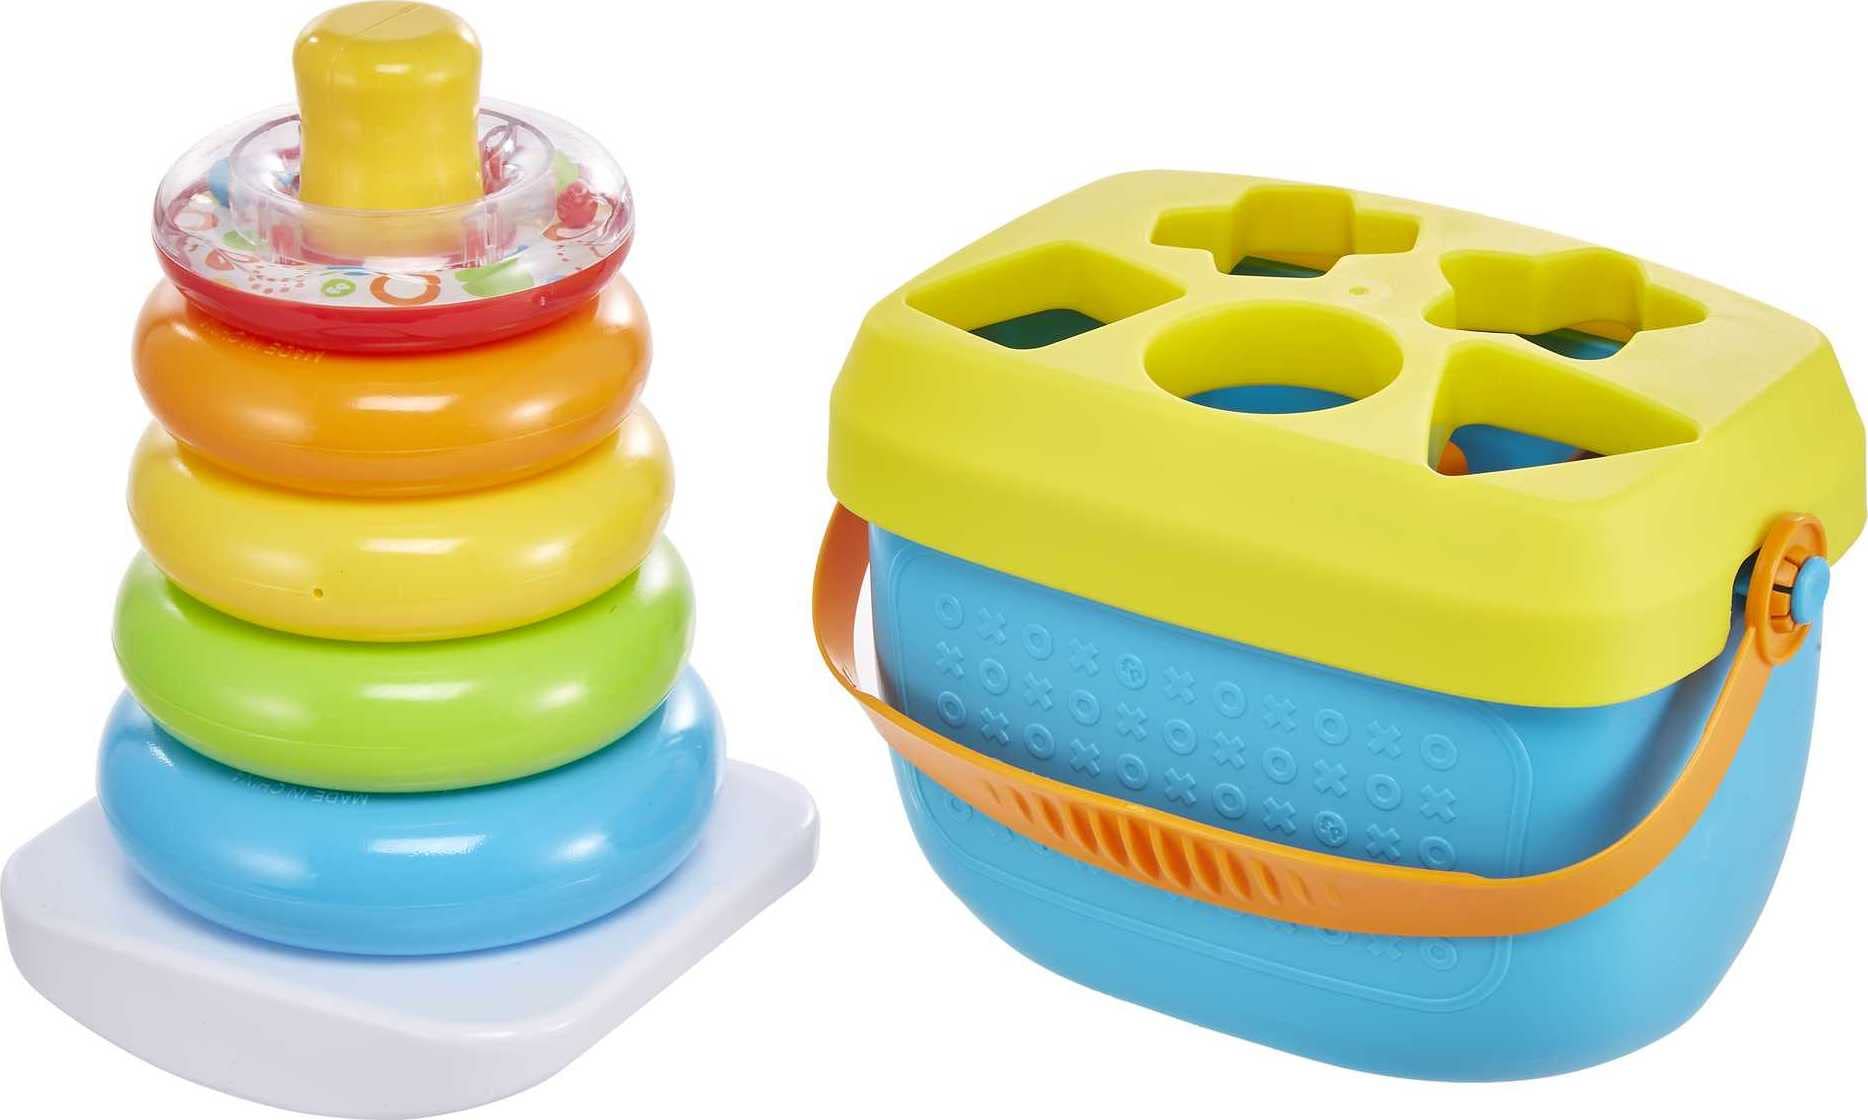 Book Cover Fisher-Price Infant Gift Set with Baby's First Blocks (10 Shapes) and Rock-A-Stack Ring Stacking Toy for Ages 6+ Months [Amazon Exclusive] Rock-a-Stack & Blocks Bundle